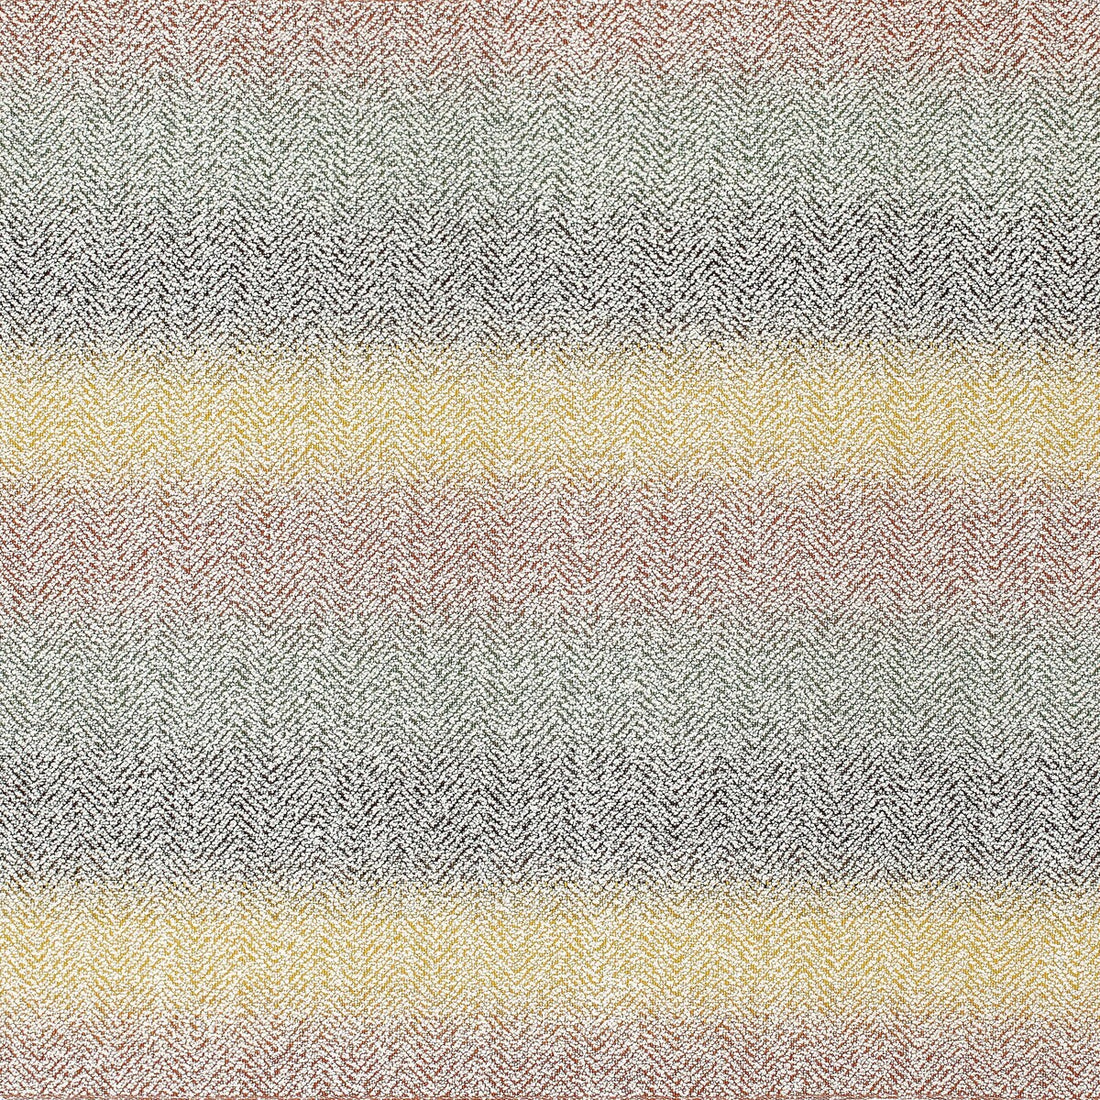 Yzeure fabric in 164 color - pattern 36253.194.0 - by Kravet Couture in the Missoni Home 2020 collection